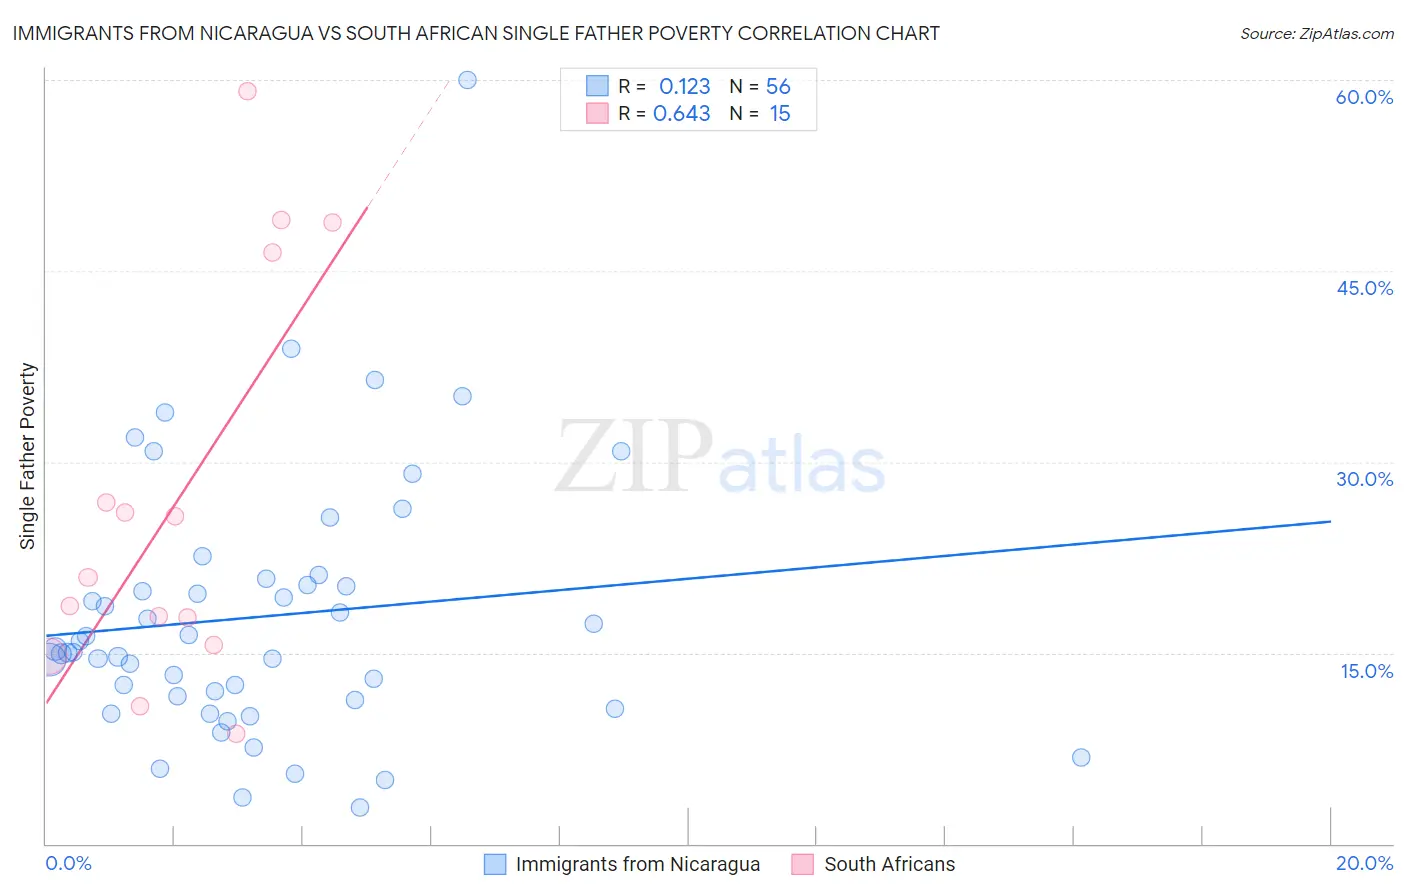 Immigrants from Nicaragua vs South African Single Father Poverty